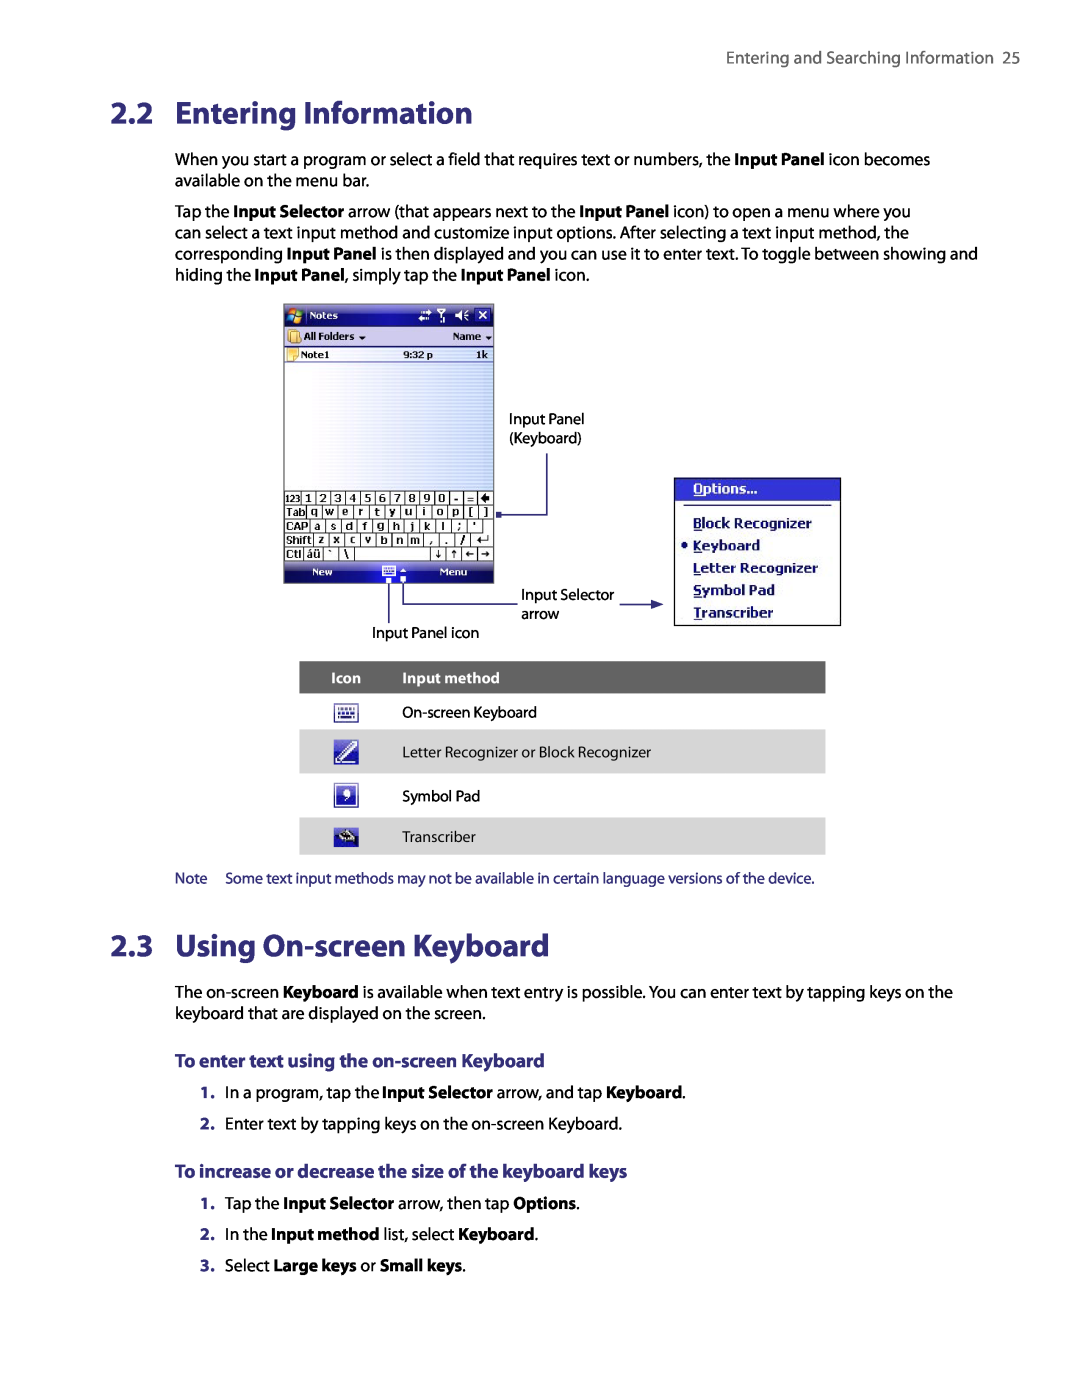 HTC PDA Phone user manual Entering Information, Using On-screen Keyboard, To enter text using the on-screen Keyboard 